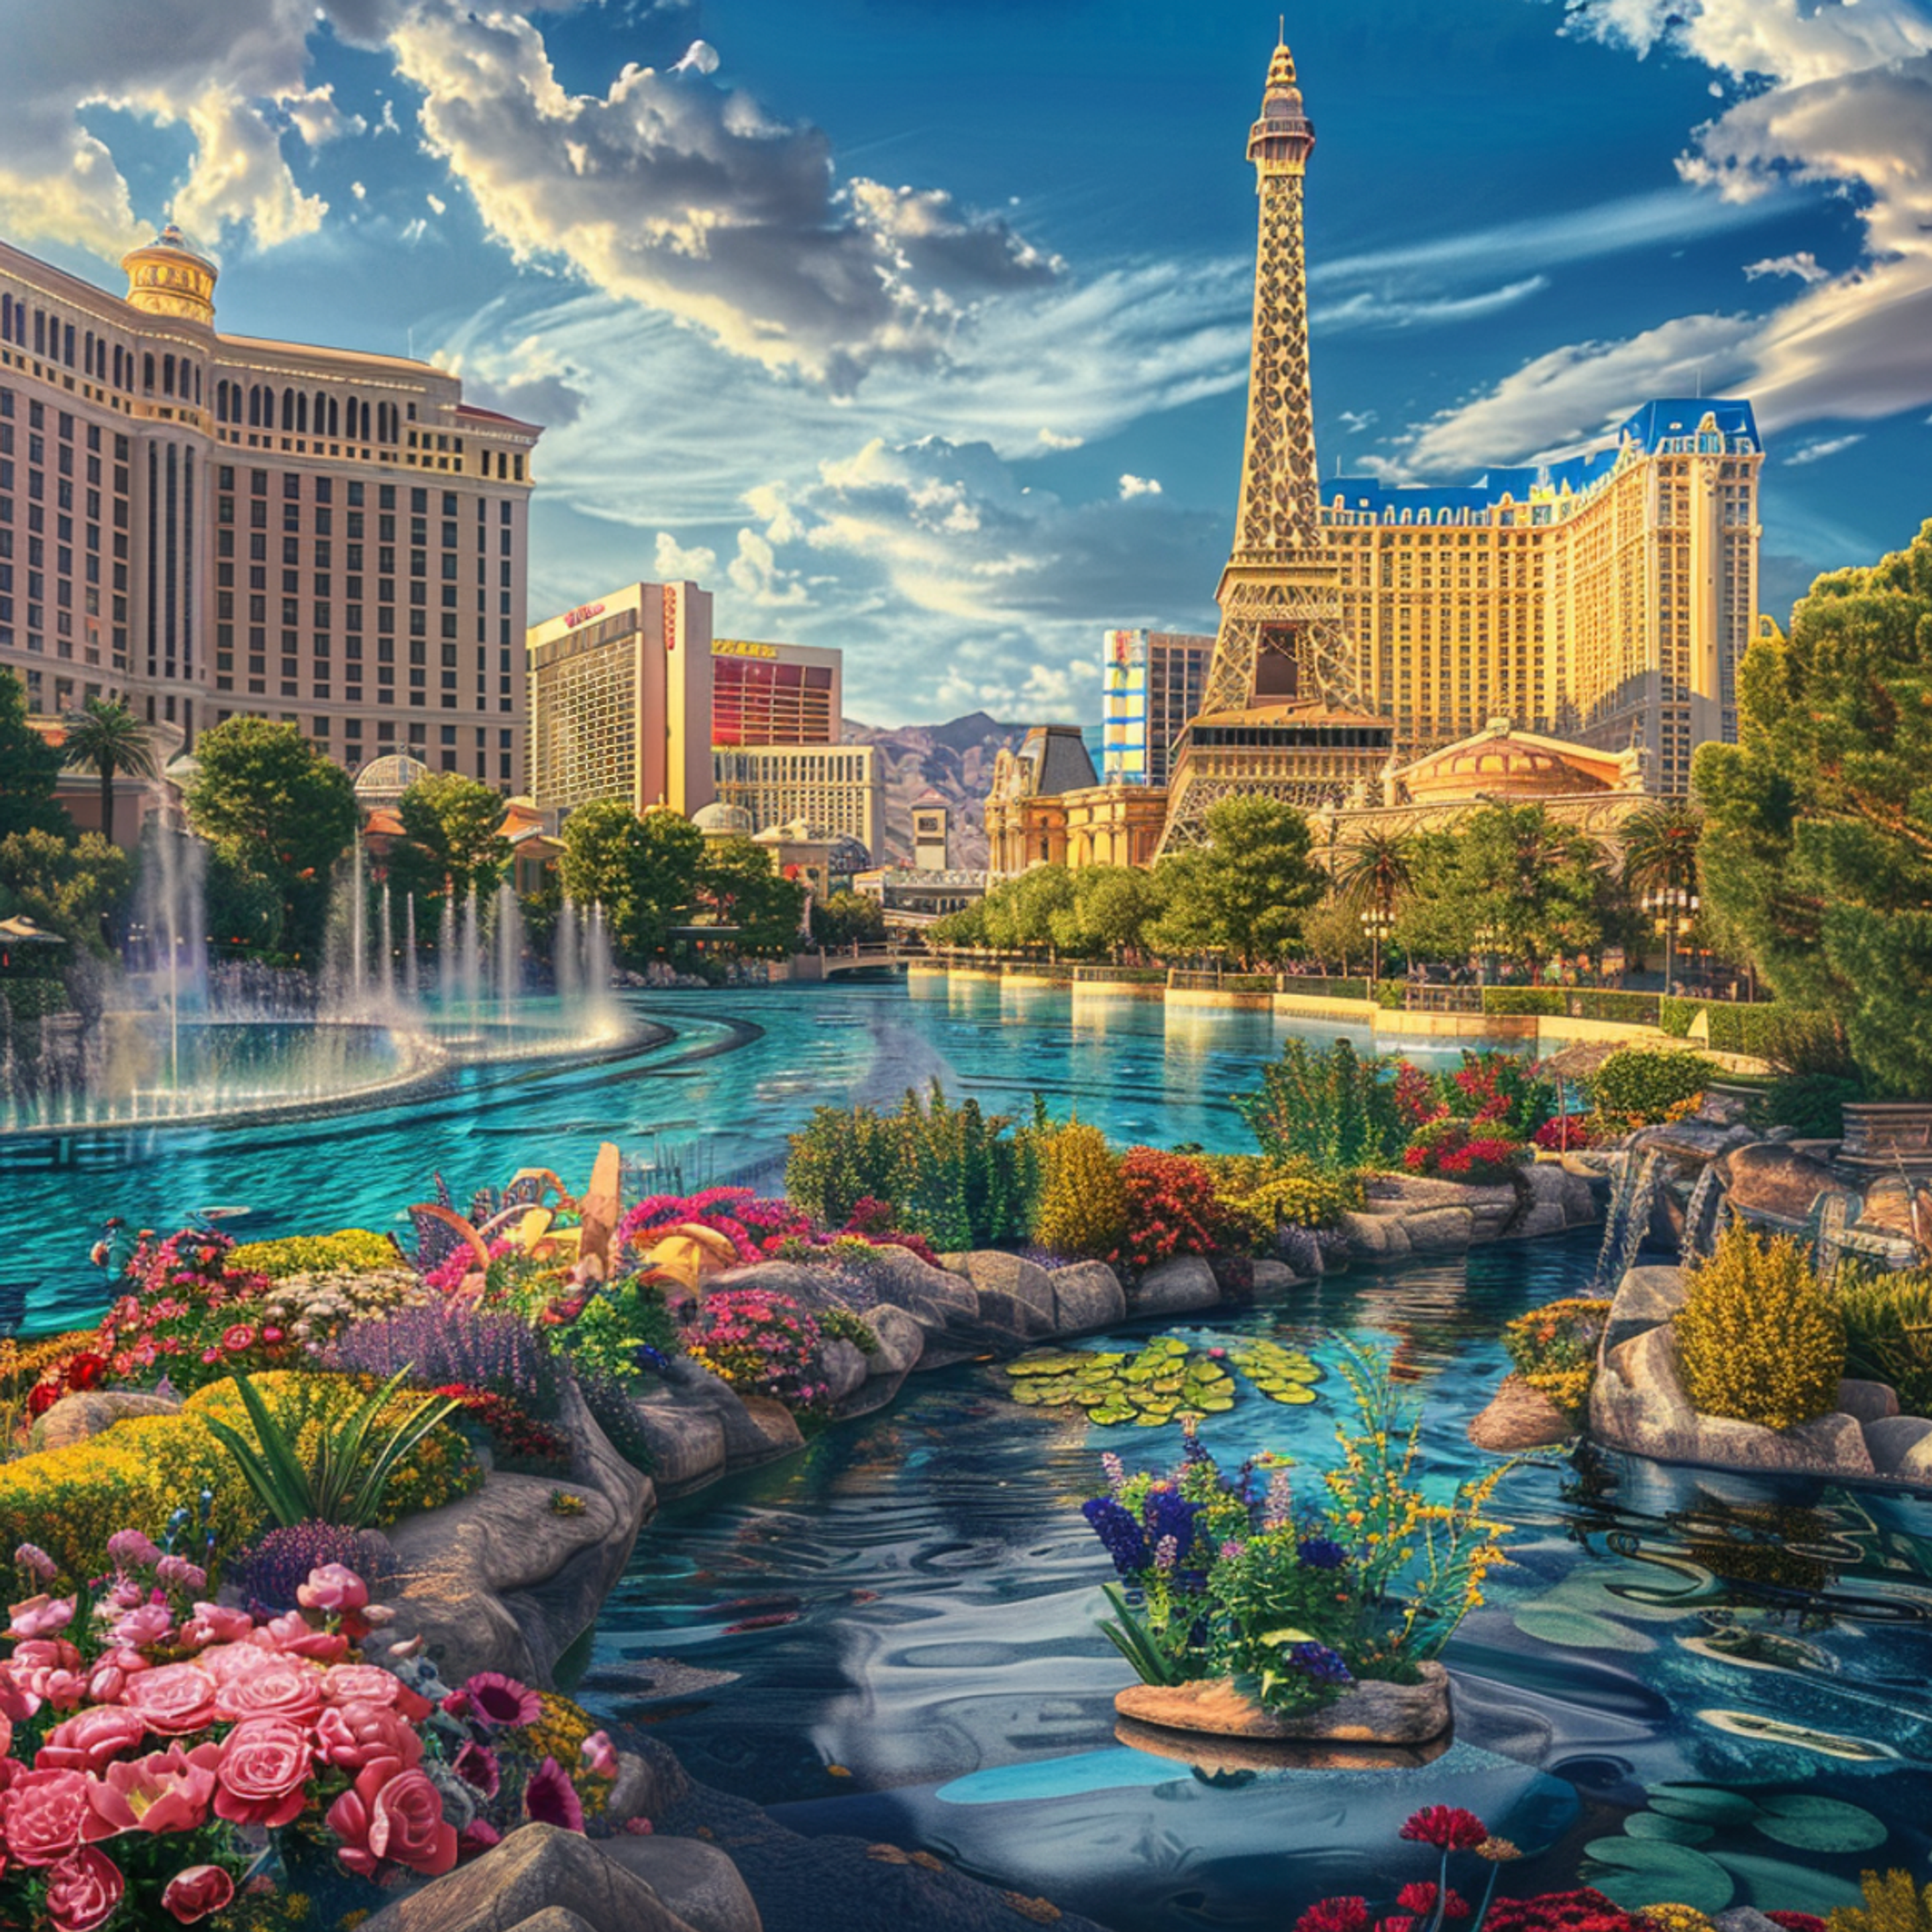 The vibrant Bellagio fountain and lush floral arrangements in the foreground, with the Paris Las Vegas Hotel and its replica Eiffel Tower rising against the Las Vegas skyline, capturing the city's flair for extravagant landscapes and iconic landmarks.